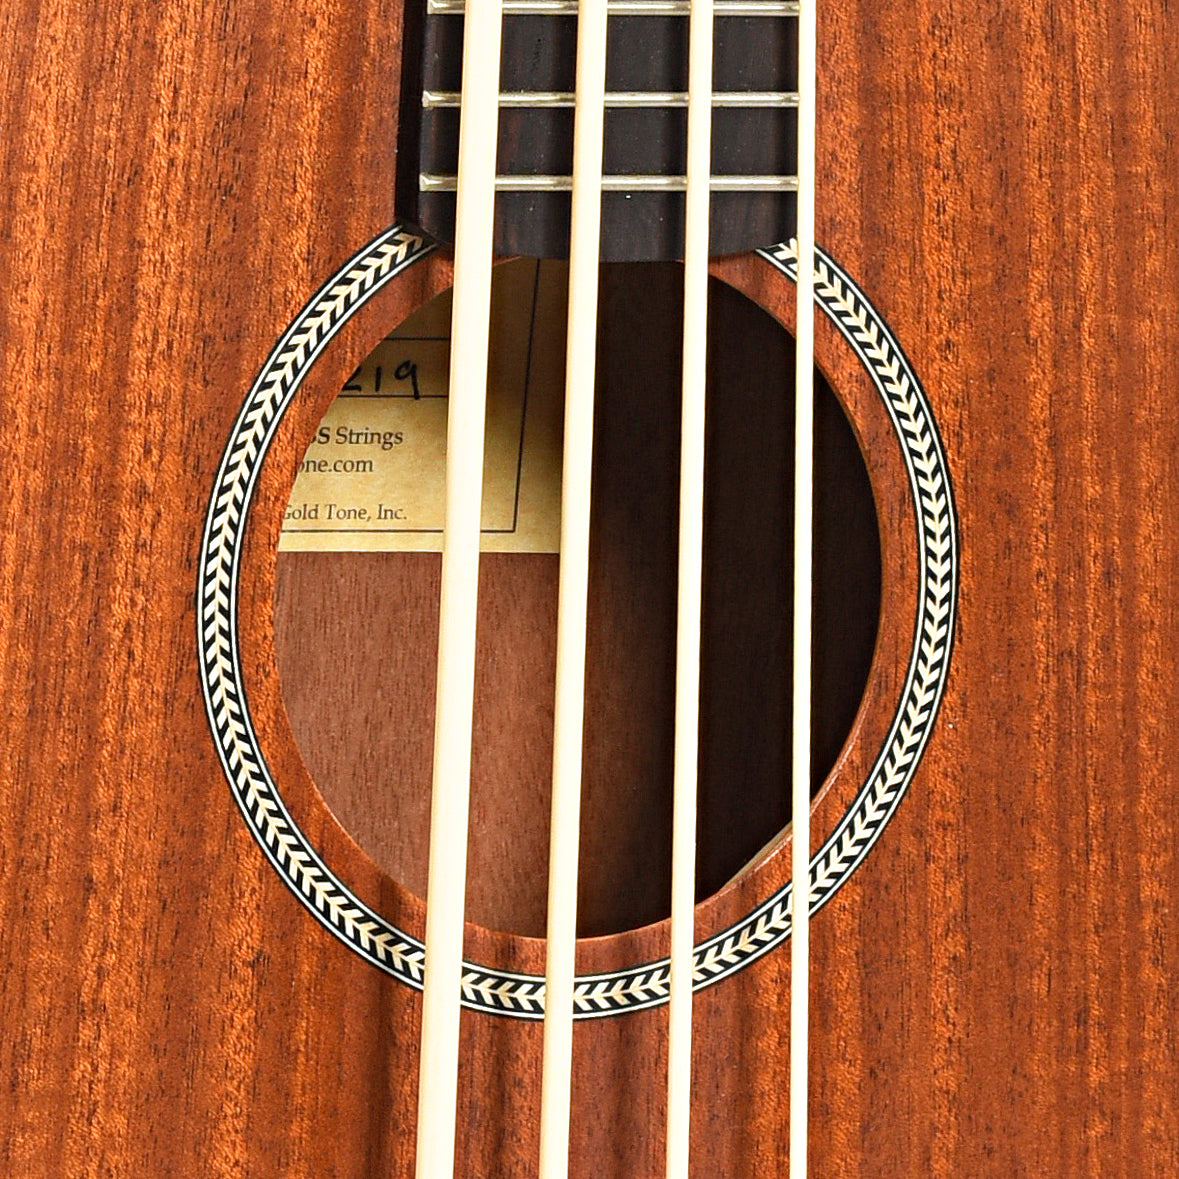 Image 5 of Gold Tone Acoustic-Electric MicroBass (2019) - SKU# 55U-210044 : Product Type Acoustic Bass Guitars : Elderly Instruments